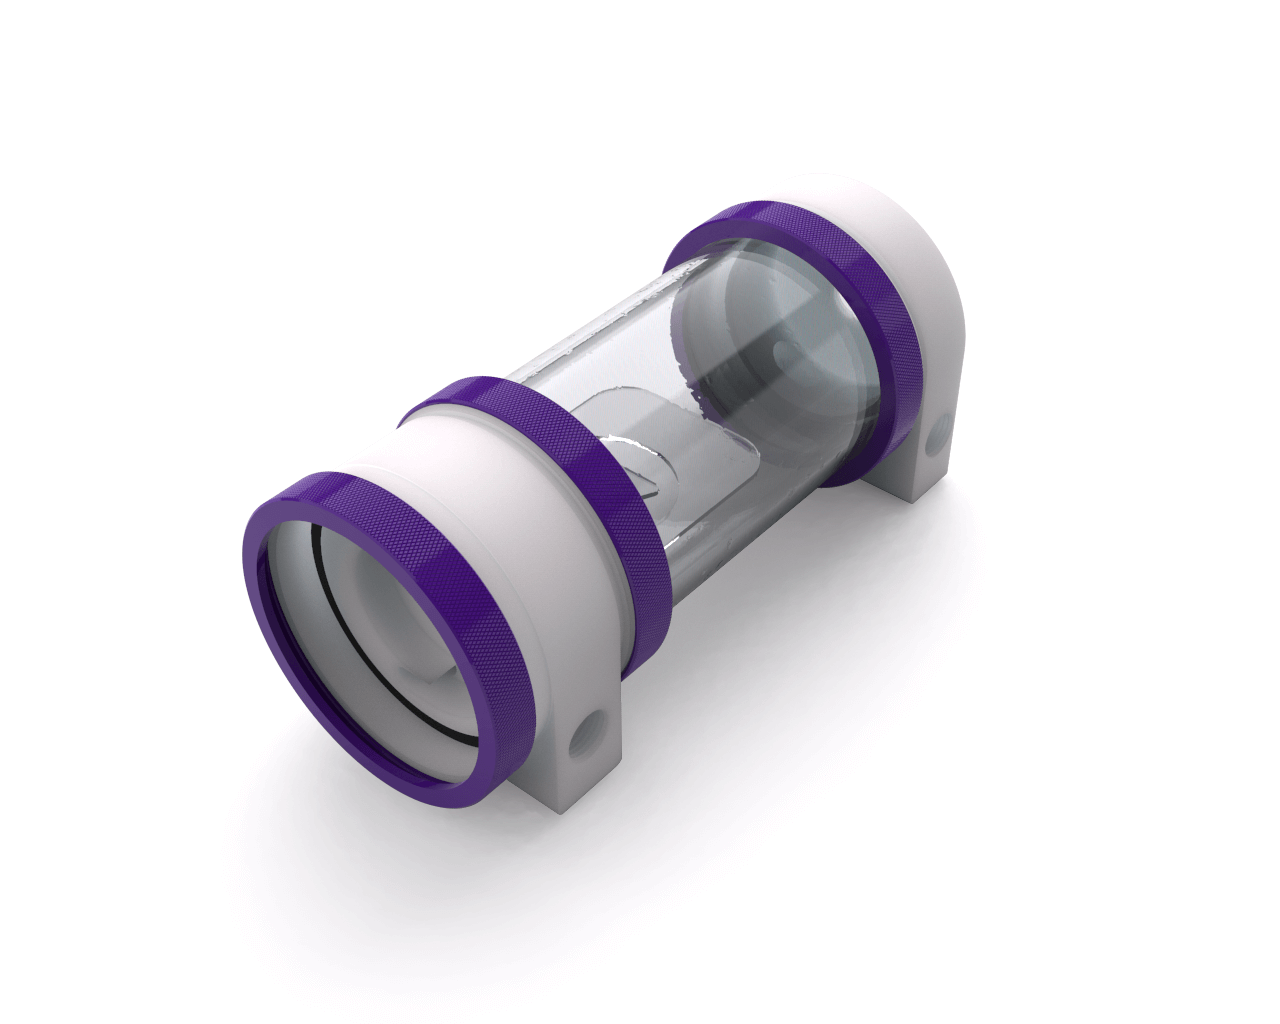 PrimoChill CTR Hard Mount Phase II High Flow D5 Enabled Reservoir - White POM - 120mm - PrimoChill - KEEPING IT COOL Purple